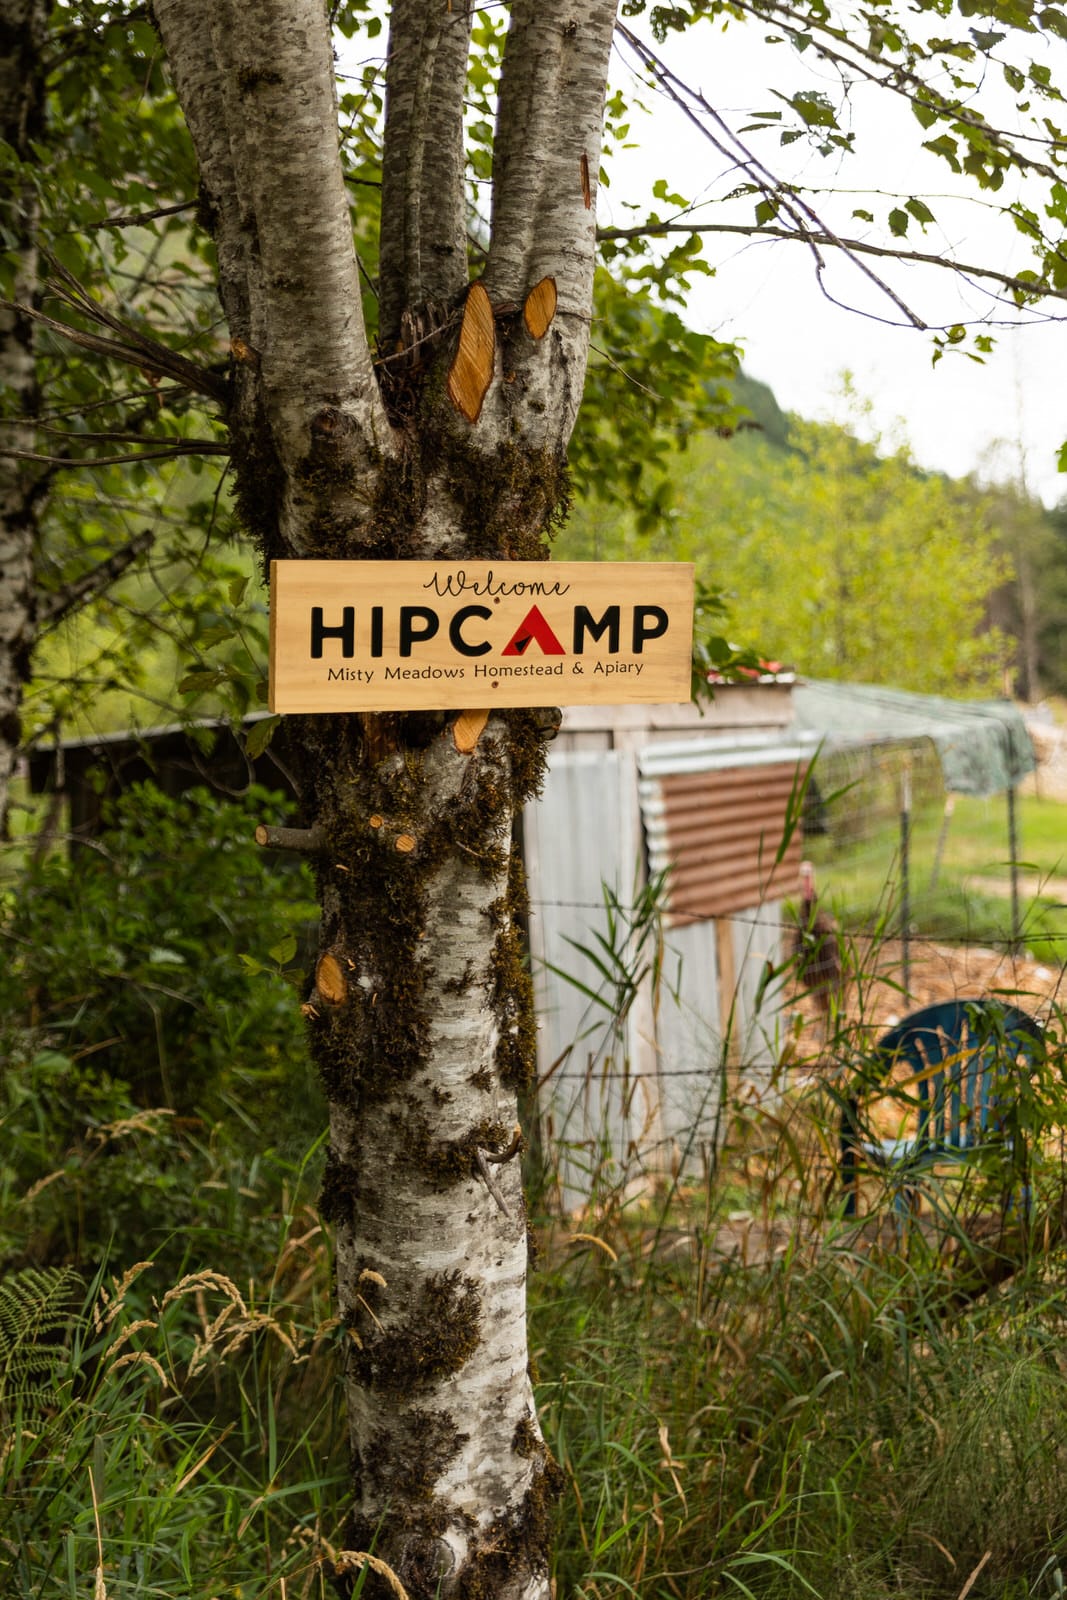 Easy to find the driveway with a big Hipcamp sign